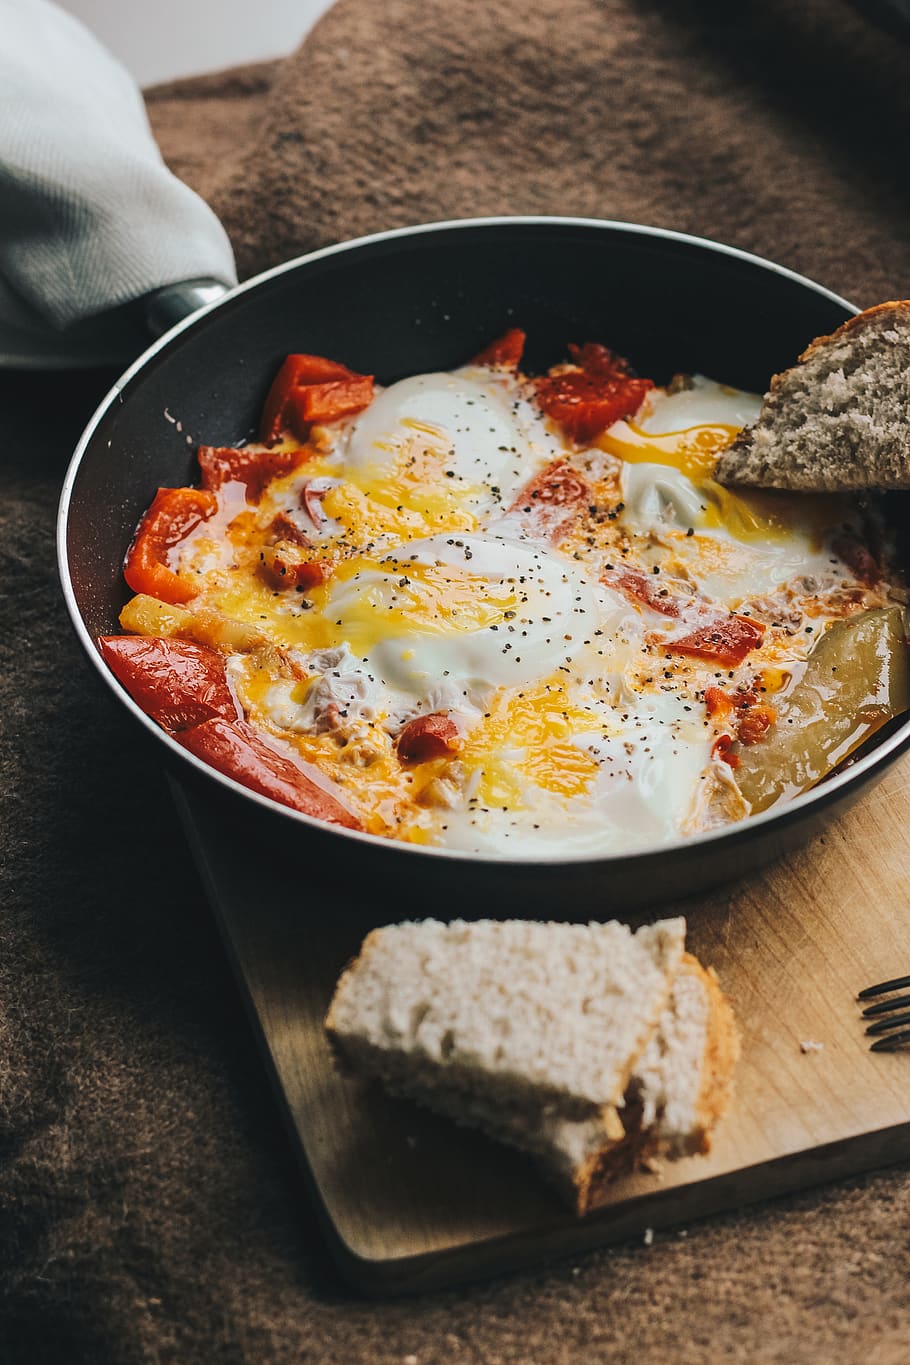 Food Photography of Cooked Eggs and Meat, appetizer, bowl, bread